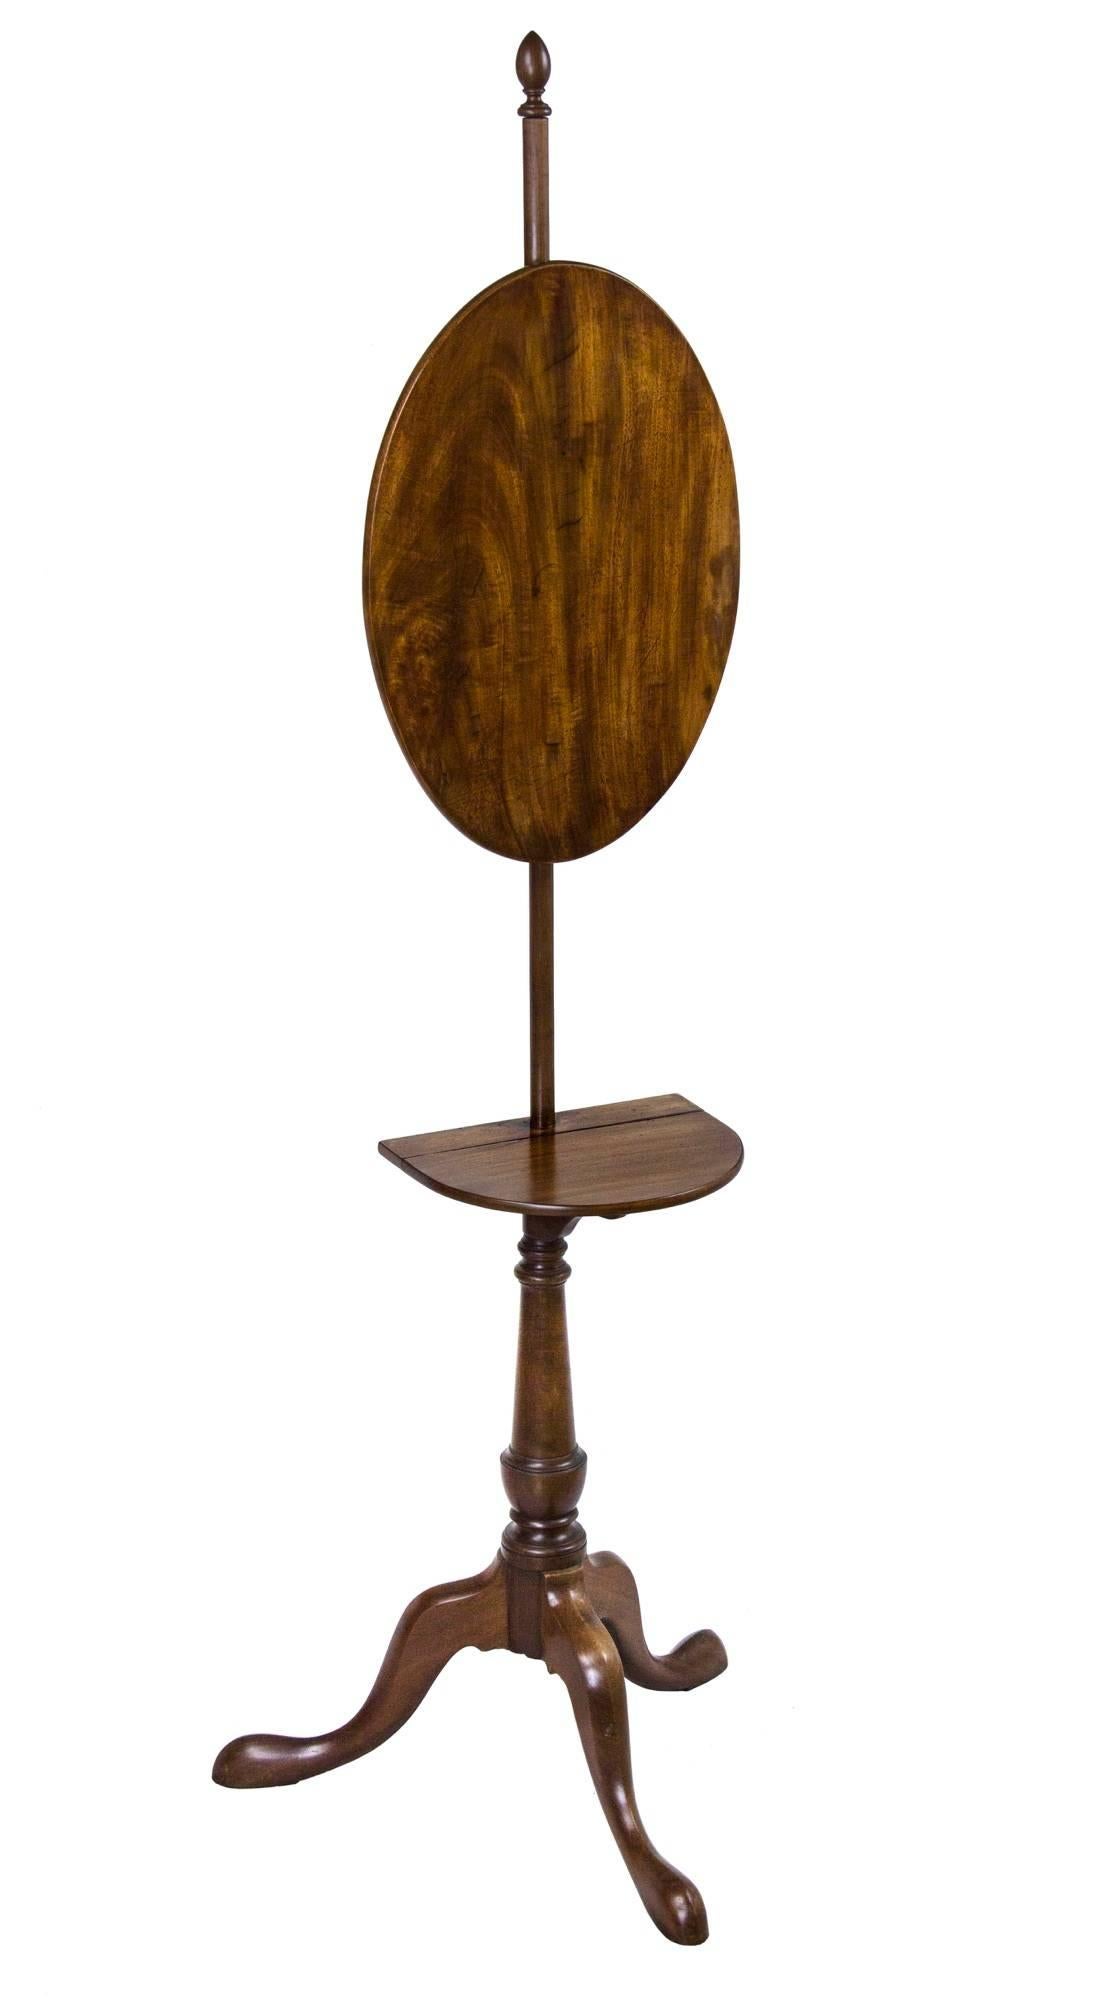 Few fire screens of solid mahogany have survived. A closely related screen is exhibited in the Peabody Essex Museum, Salem, and another example is illustrated by the Israel Sack Collection (shown below). This table has the traditional urn and